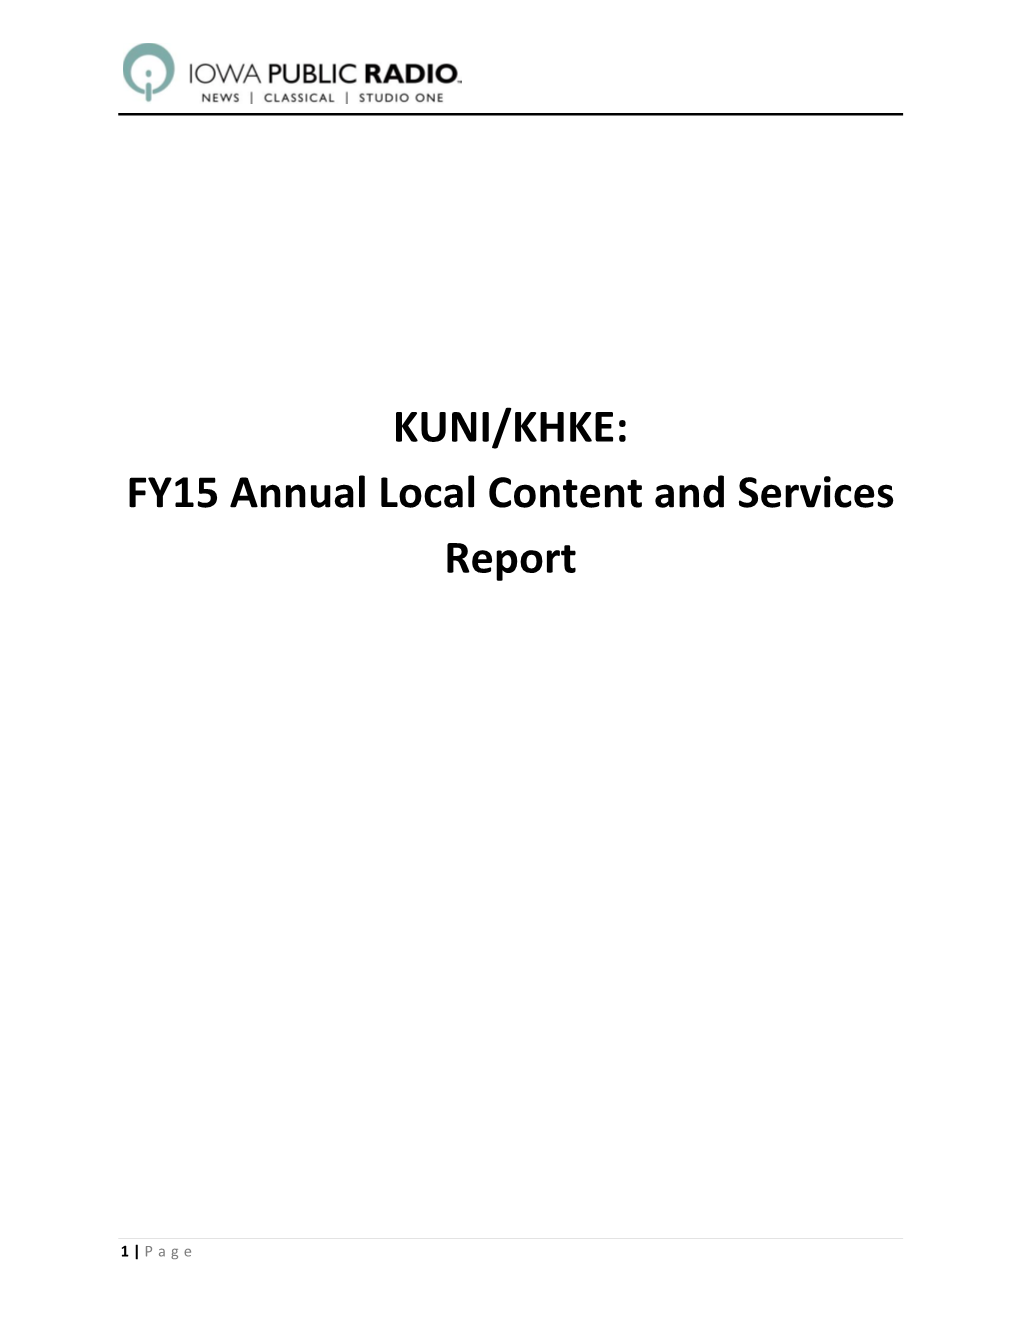 KUNI/KHKE: FY15 Annual Local Content and Services Report